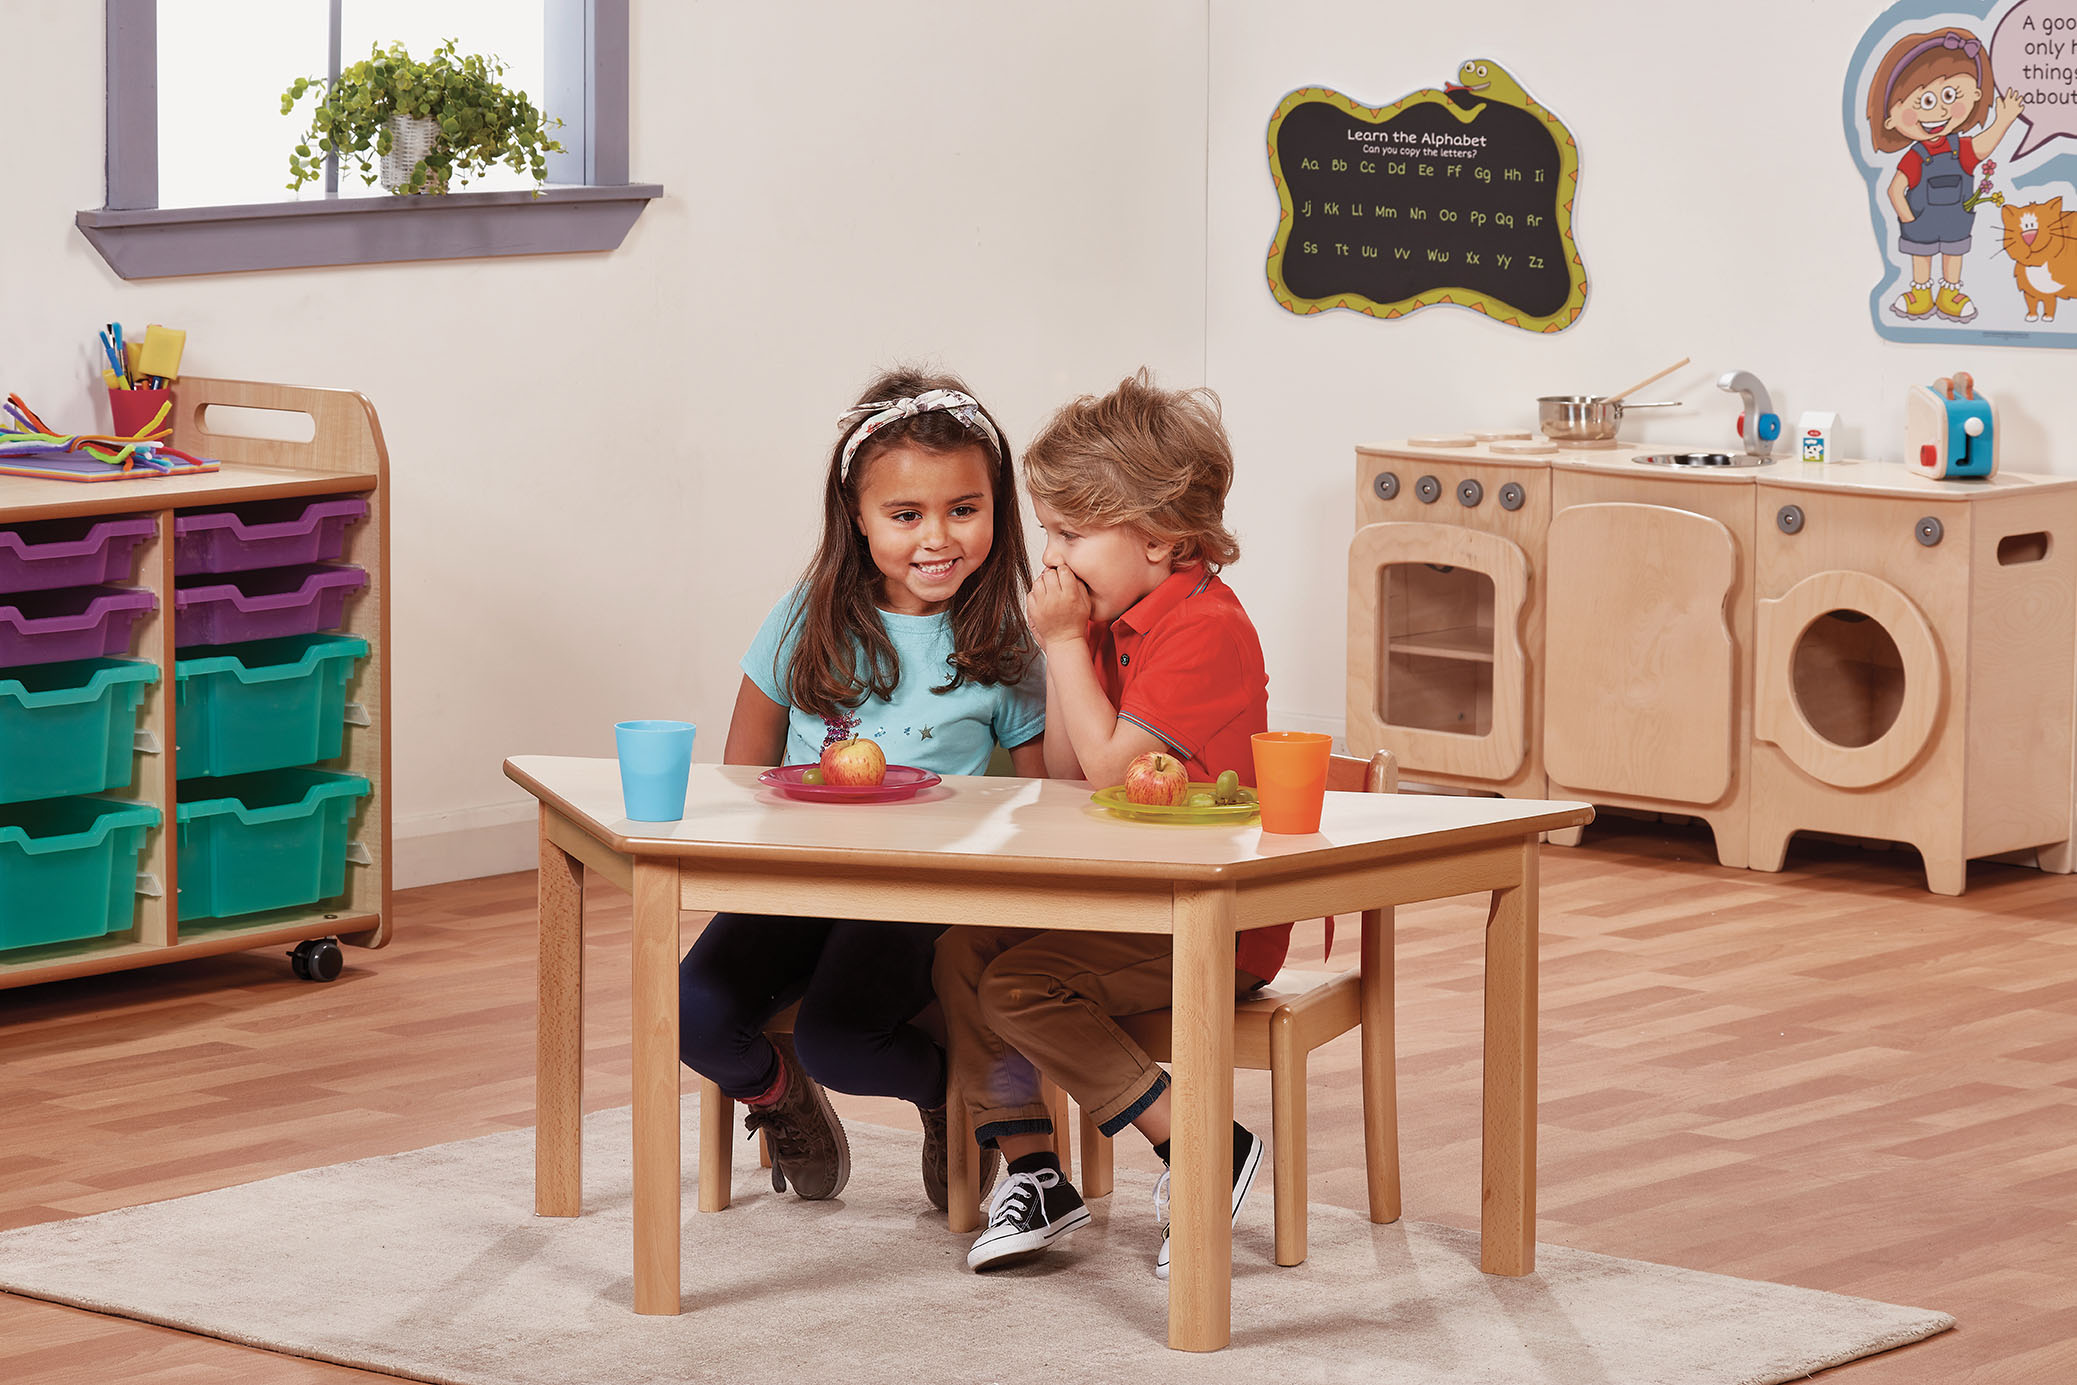 PT822-Millhouse-Early-Years-Furniture-Trapezoidal-Table_Lifestyle_RGB.jpg